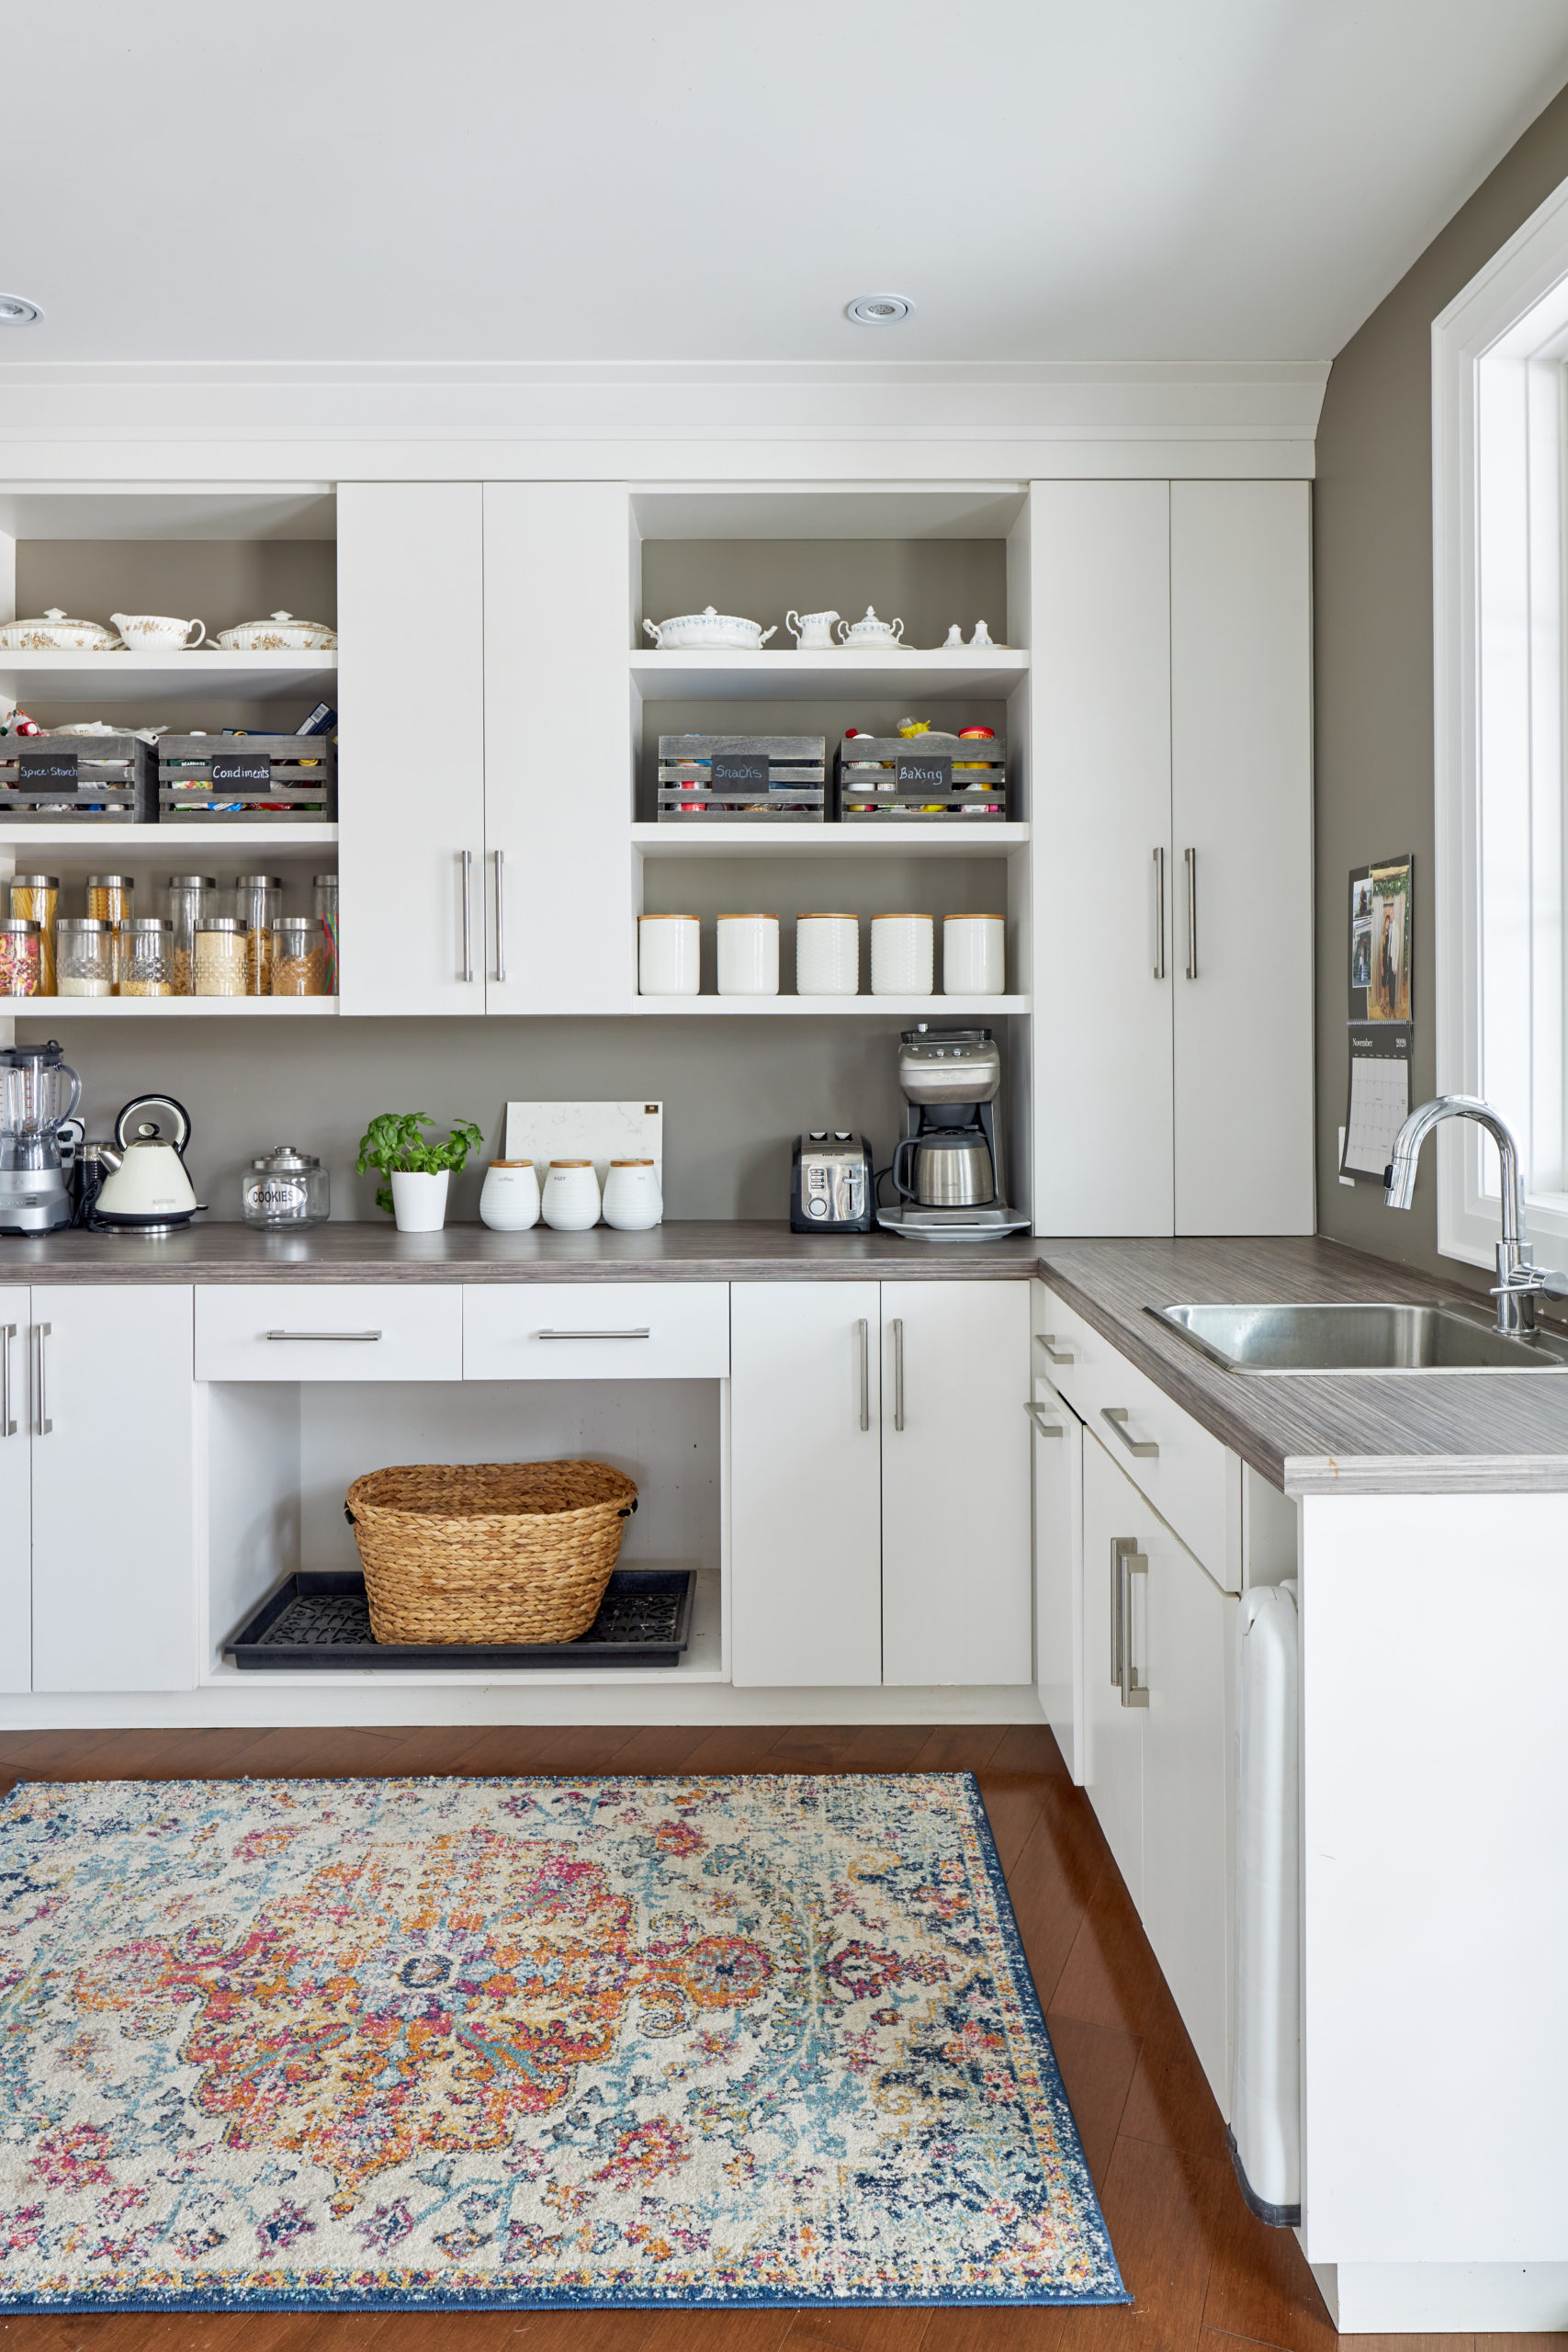 pantry interior featuring ornate rug 